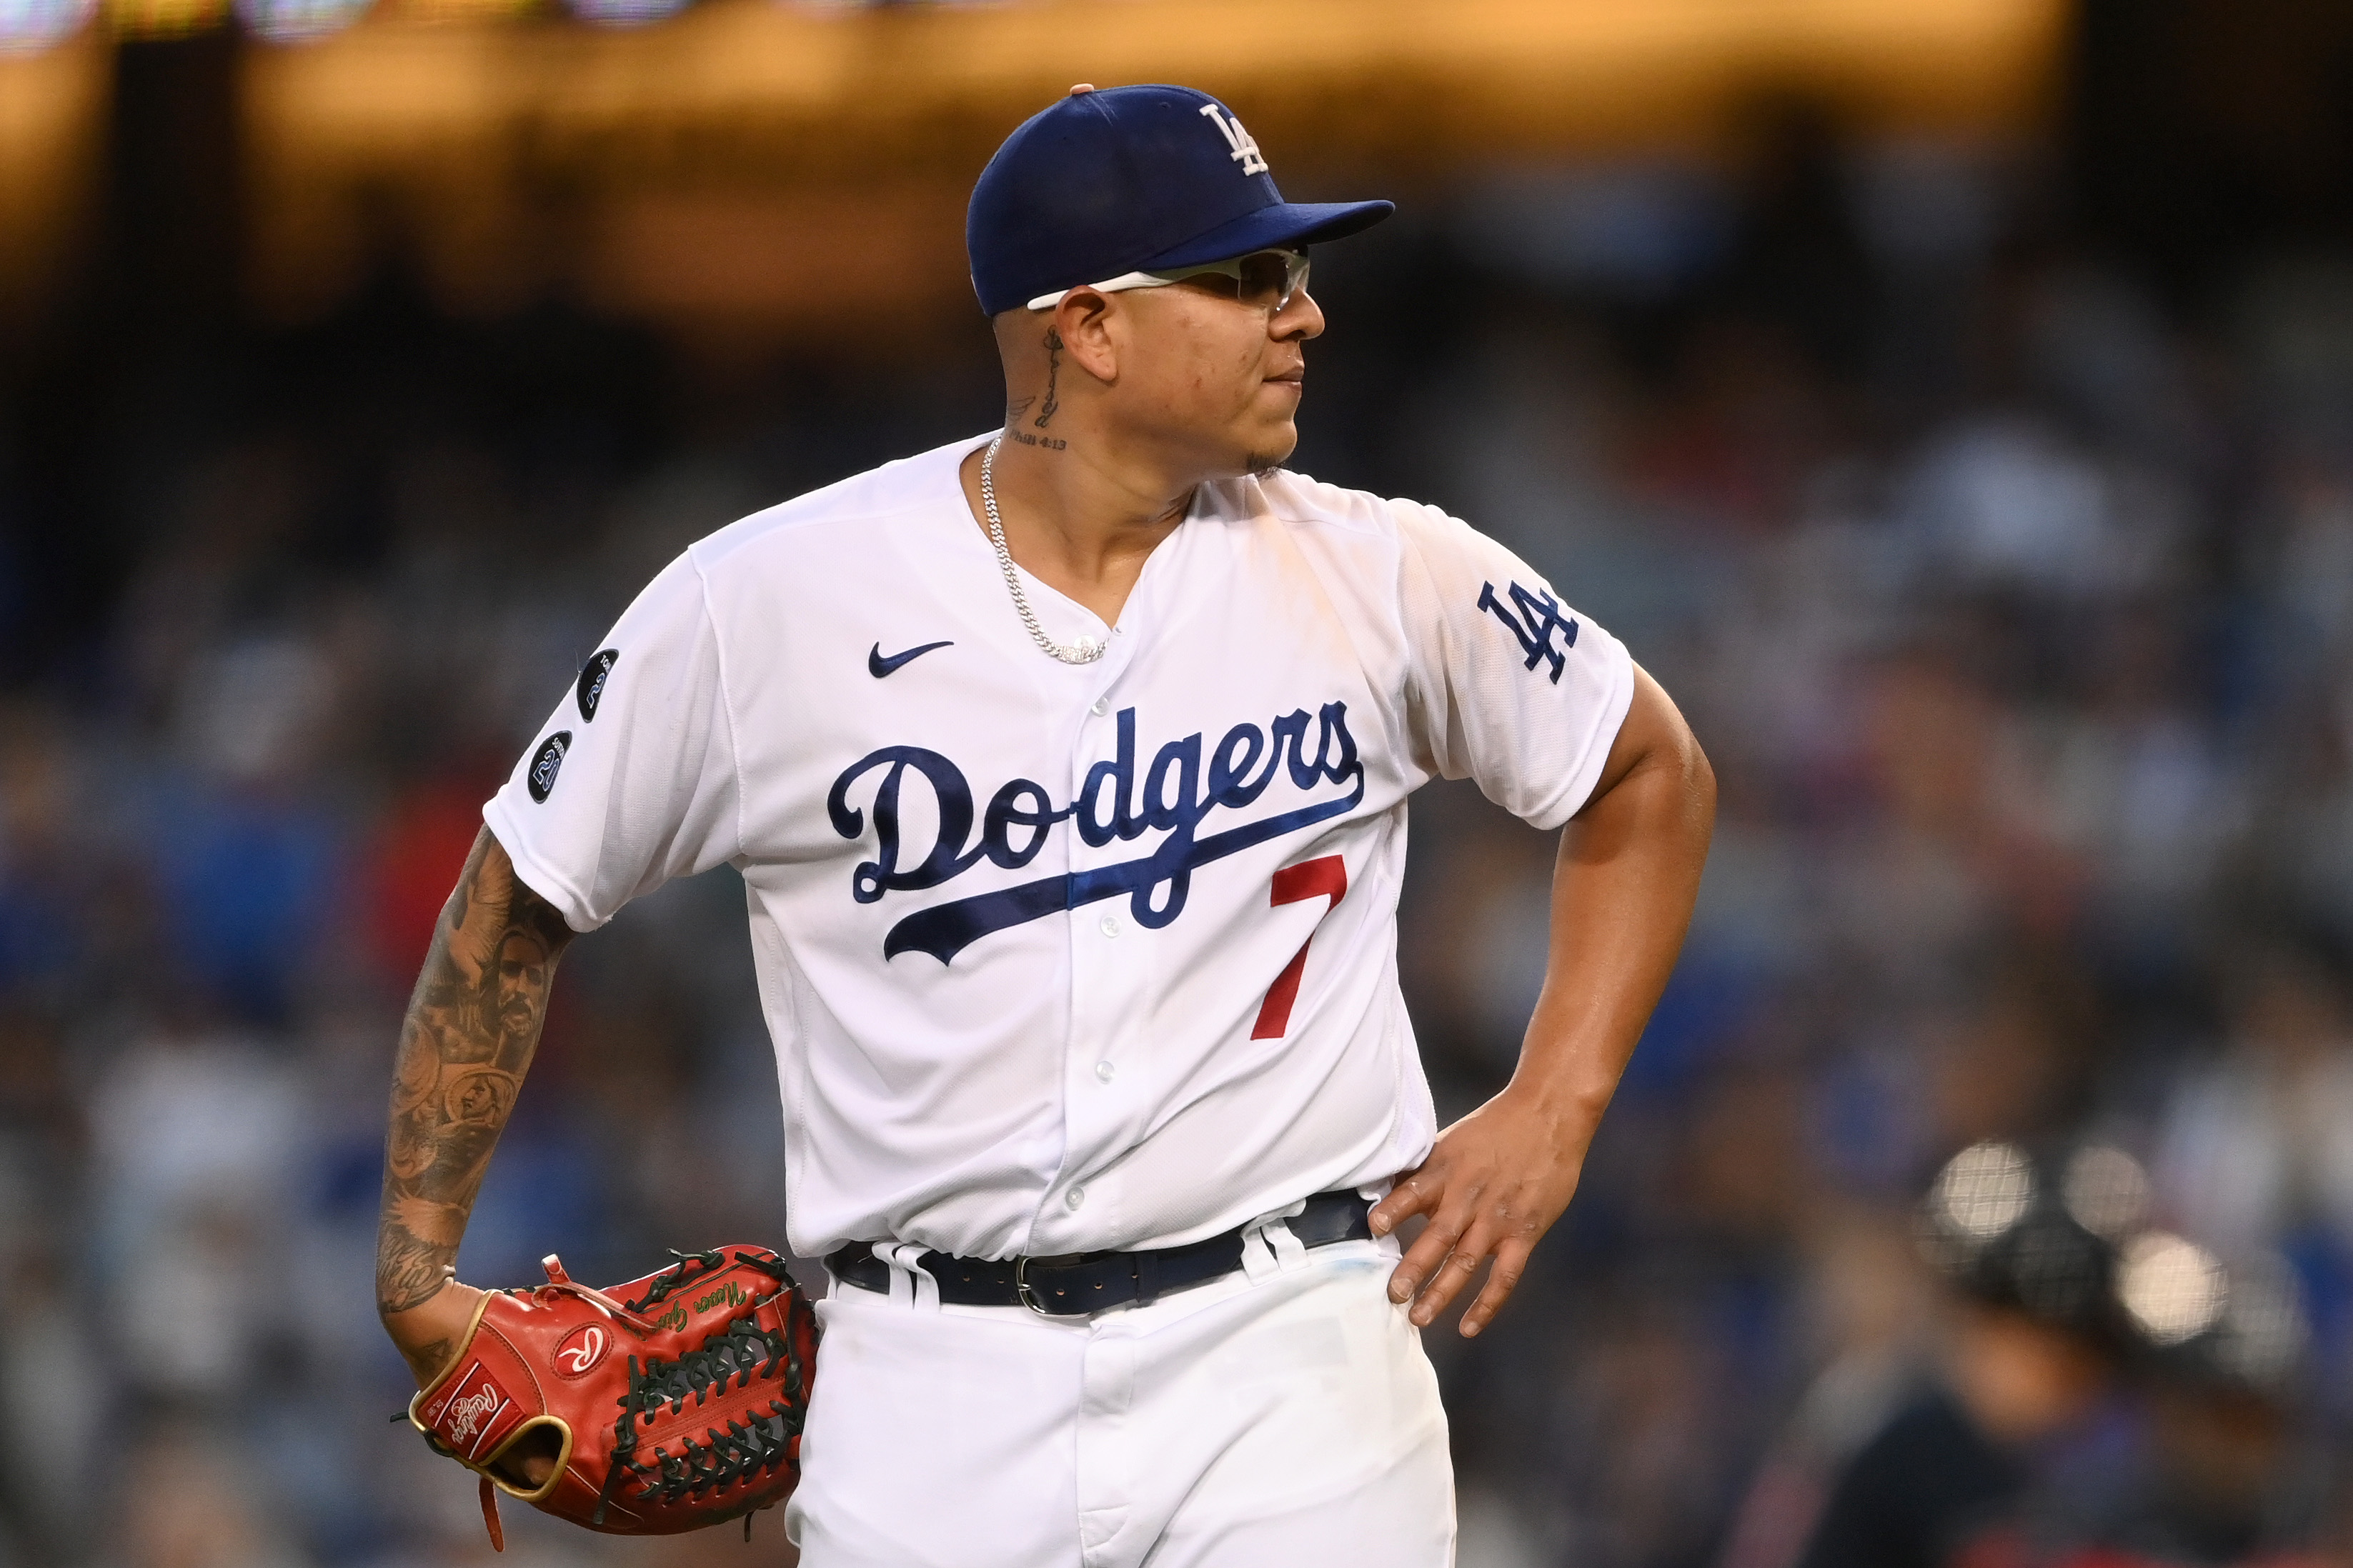 MLB on FOX - Julio Urias' father got a tattoo of his son